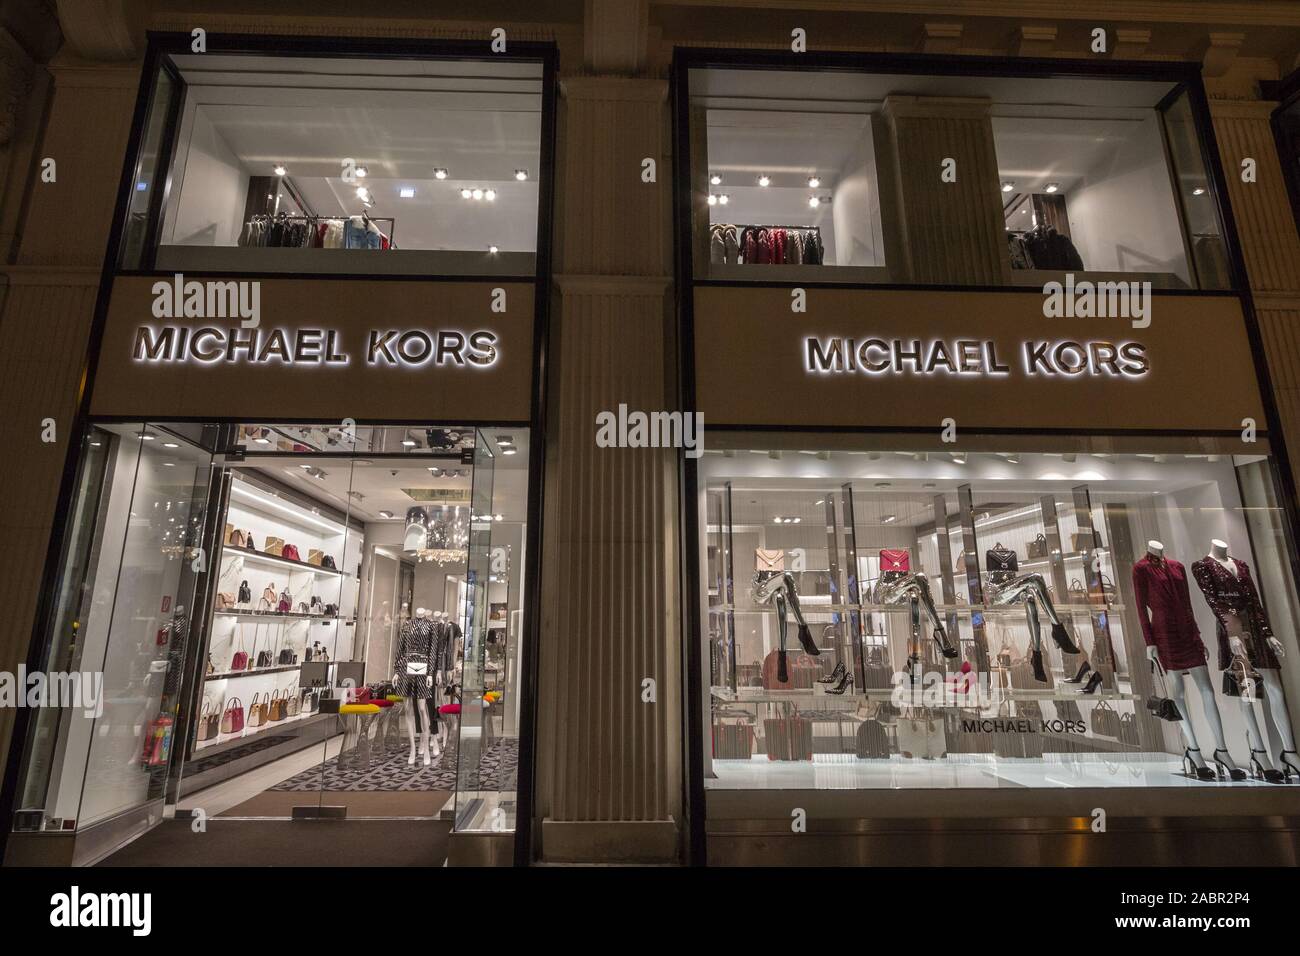 Michael Kors Fashion Store Shop High Resolution Stock Photography and  Images - Alamy